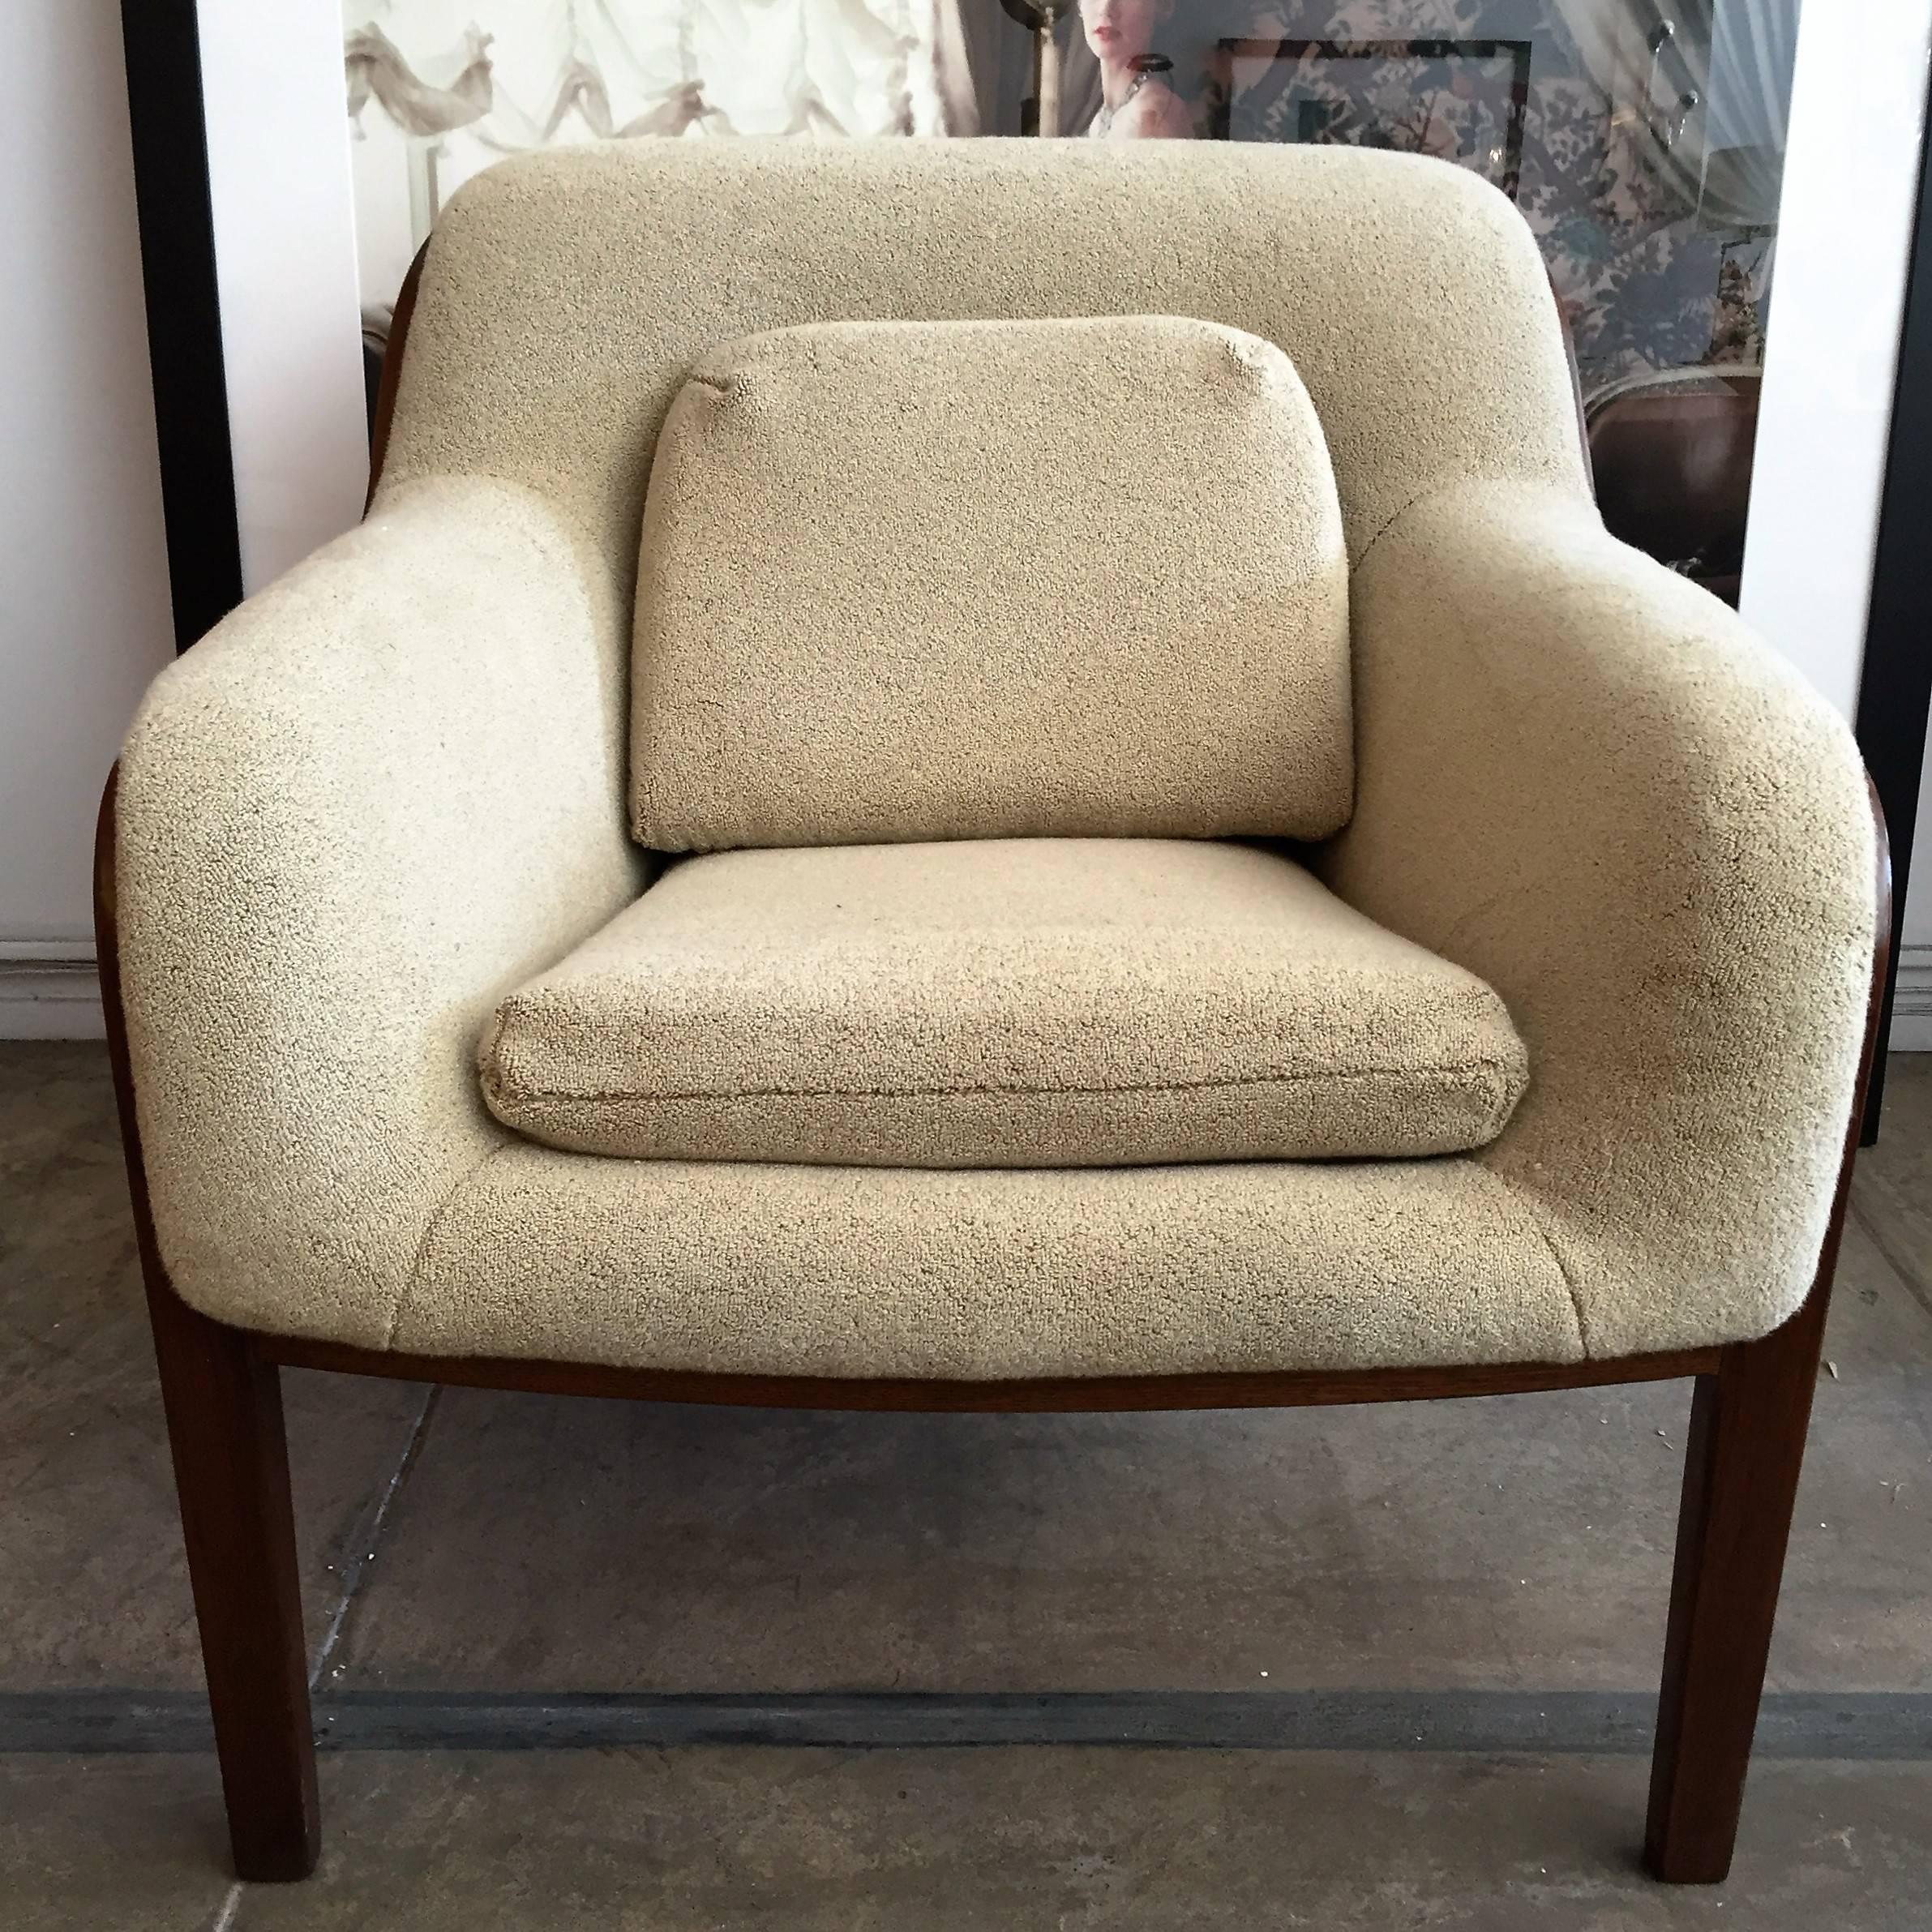 An original pair of cream bouclé upholstered bent walnut lounge chairs designed by Bill Stephens for Knoll.

 